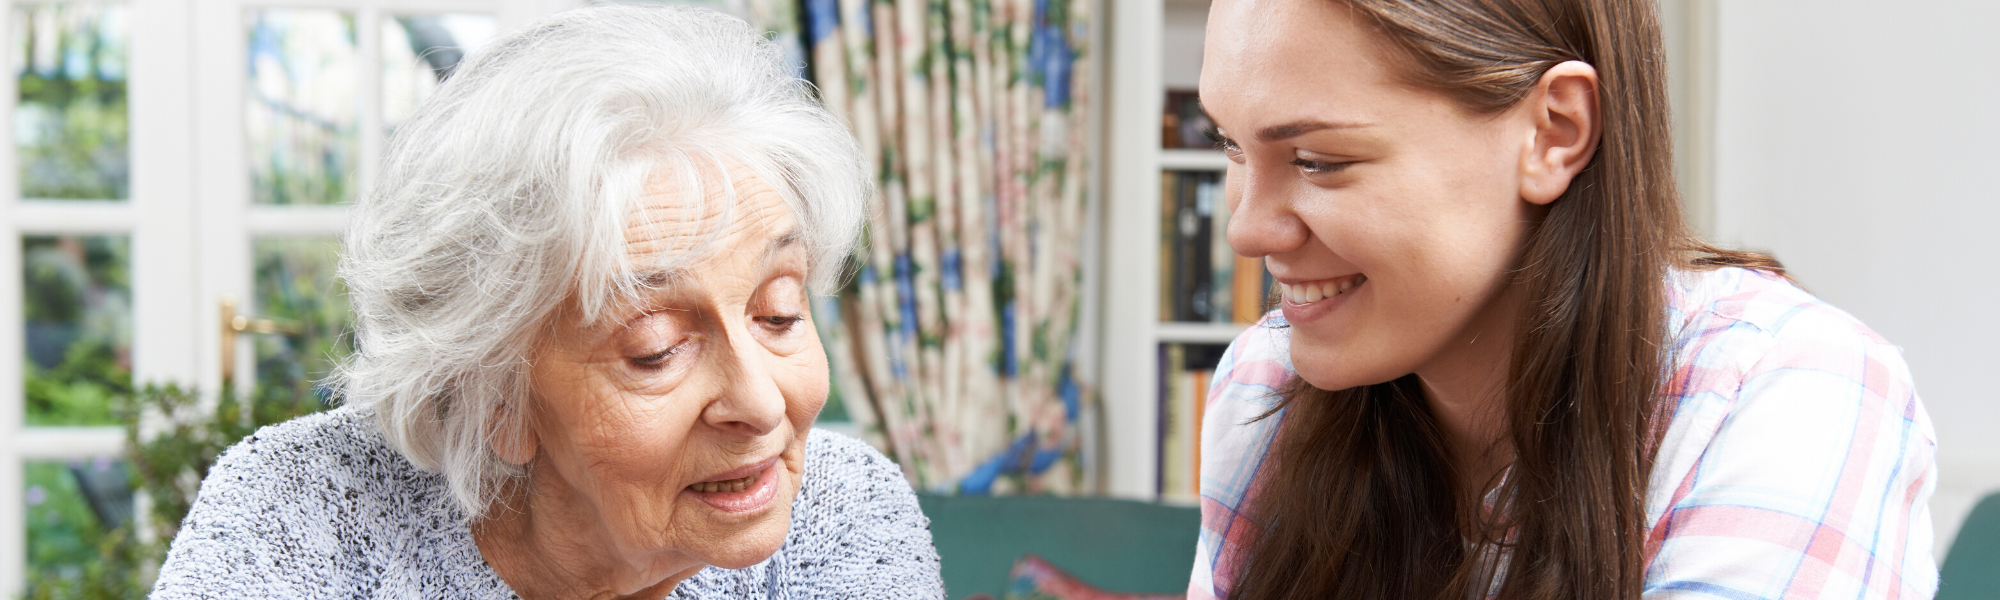 role of care assistant.qualities of a care assistant. career in care